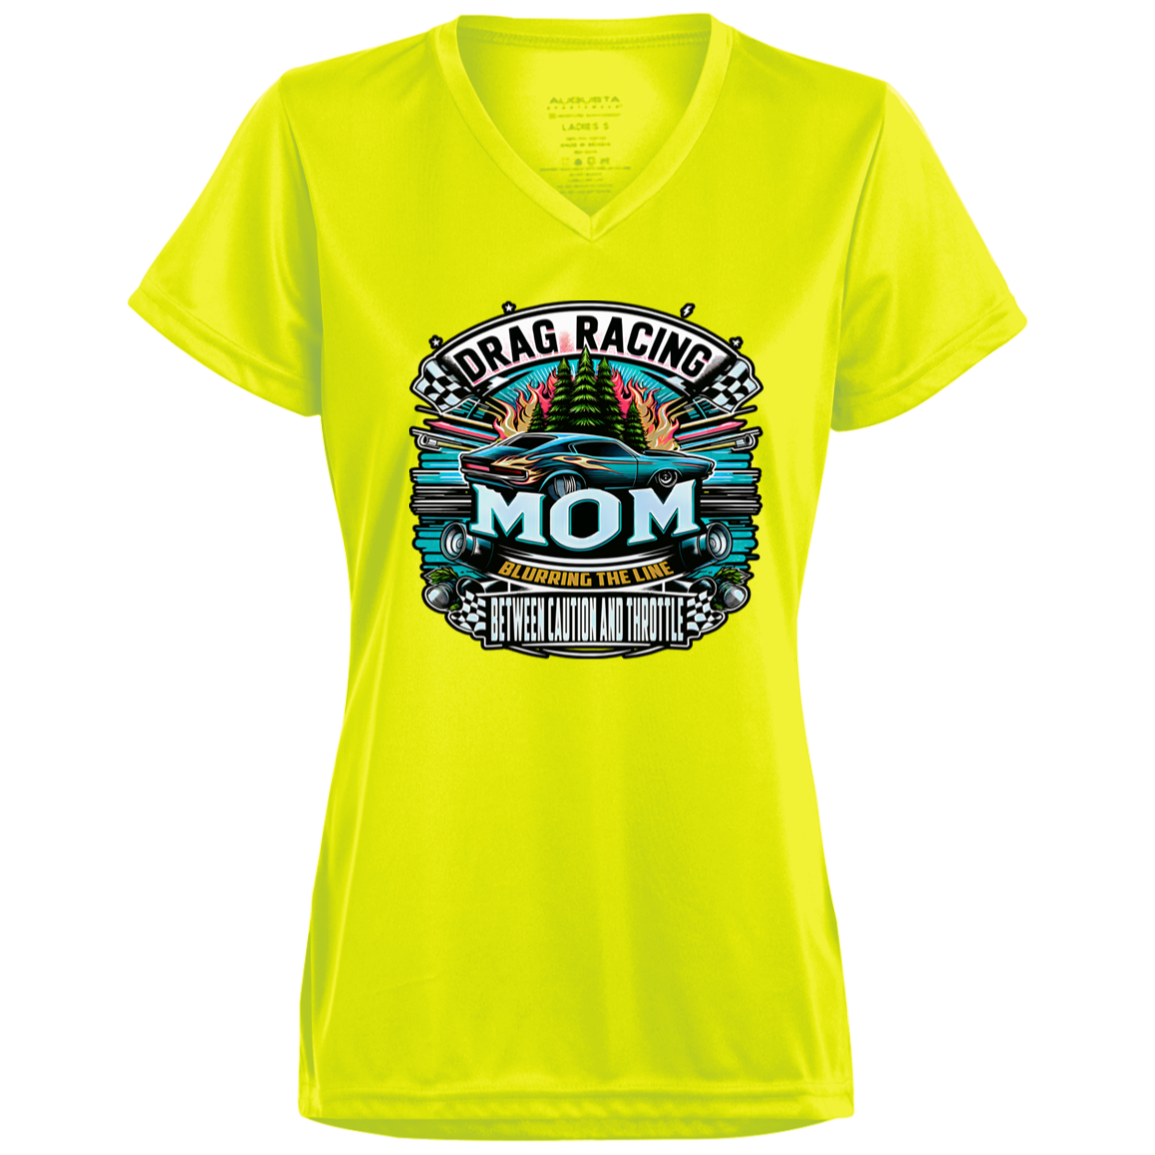 Drag Racing Mom Blurring the Line Between Caution and Throttle Ladies’ Moisture-Wicking V-Neck Tee